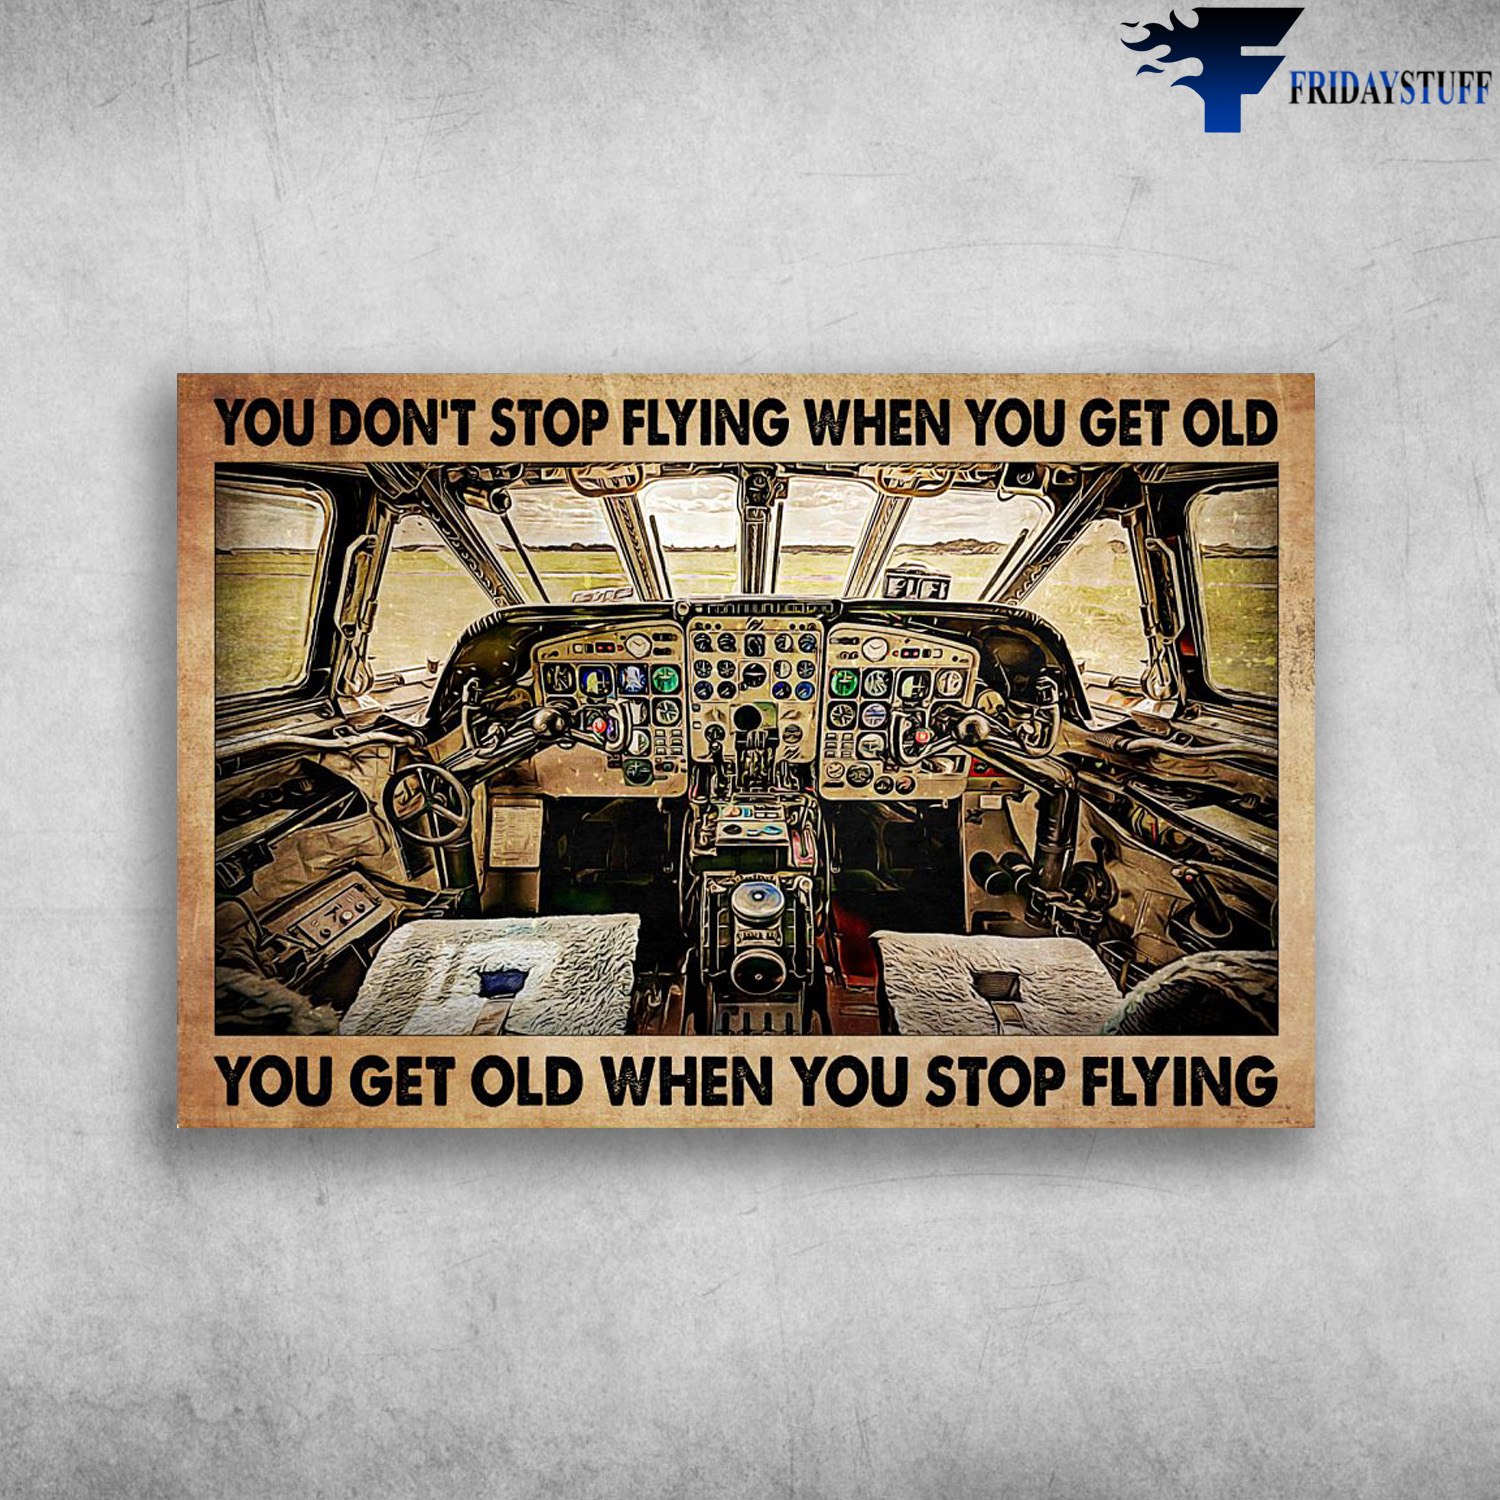 Airplane Cockpit - You Don't Stop Flying When You Get Old, You Get Old When You Stop Flying